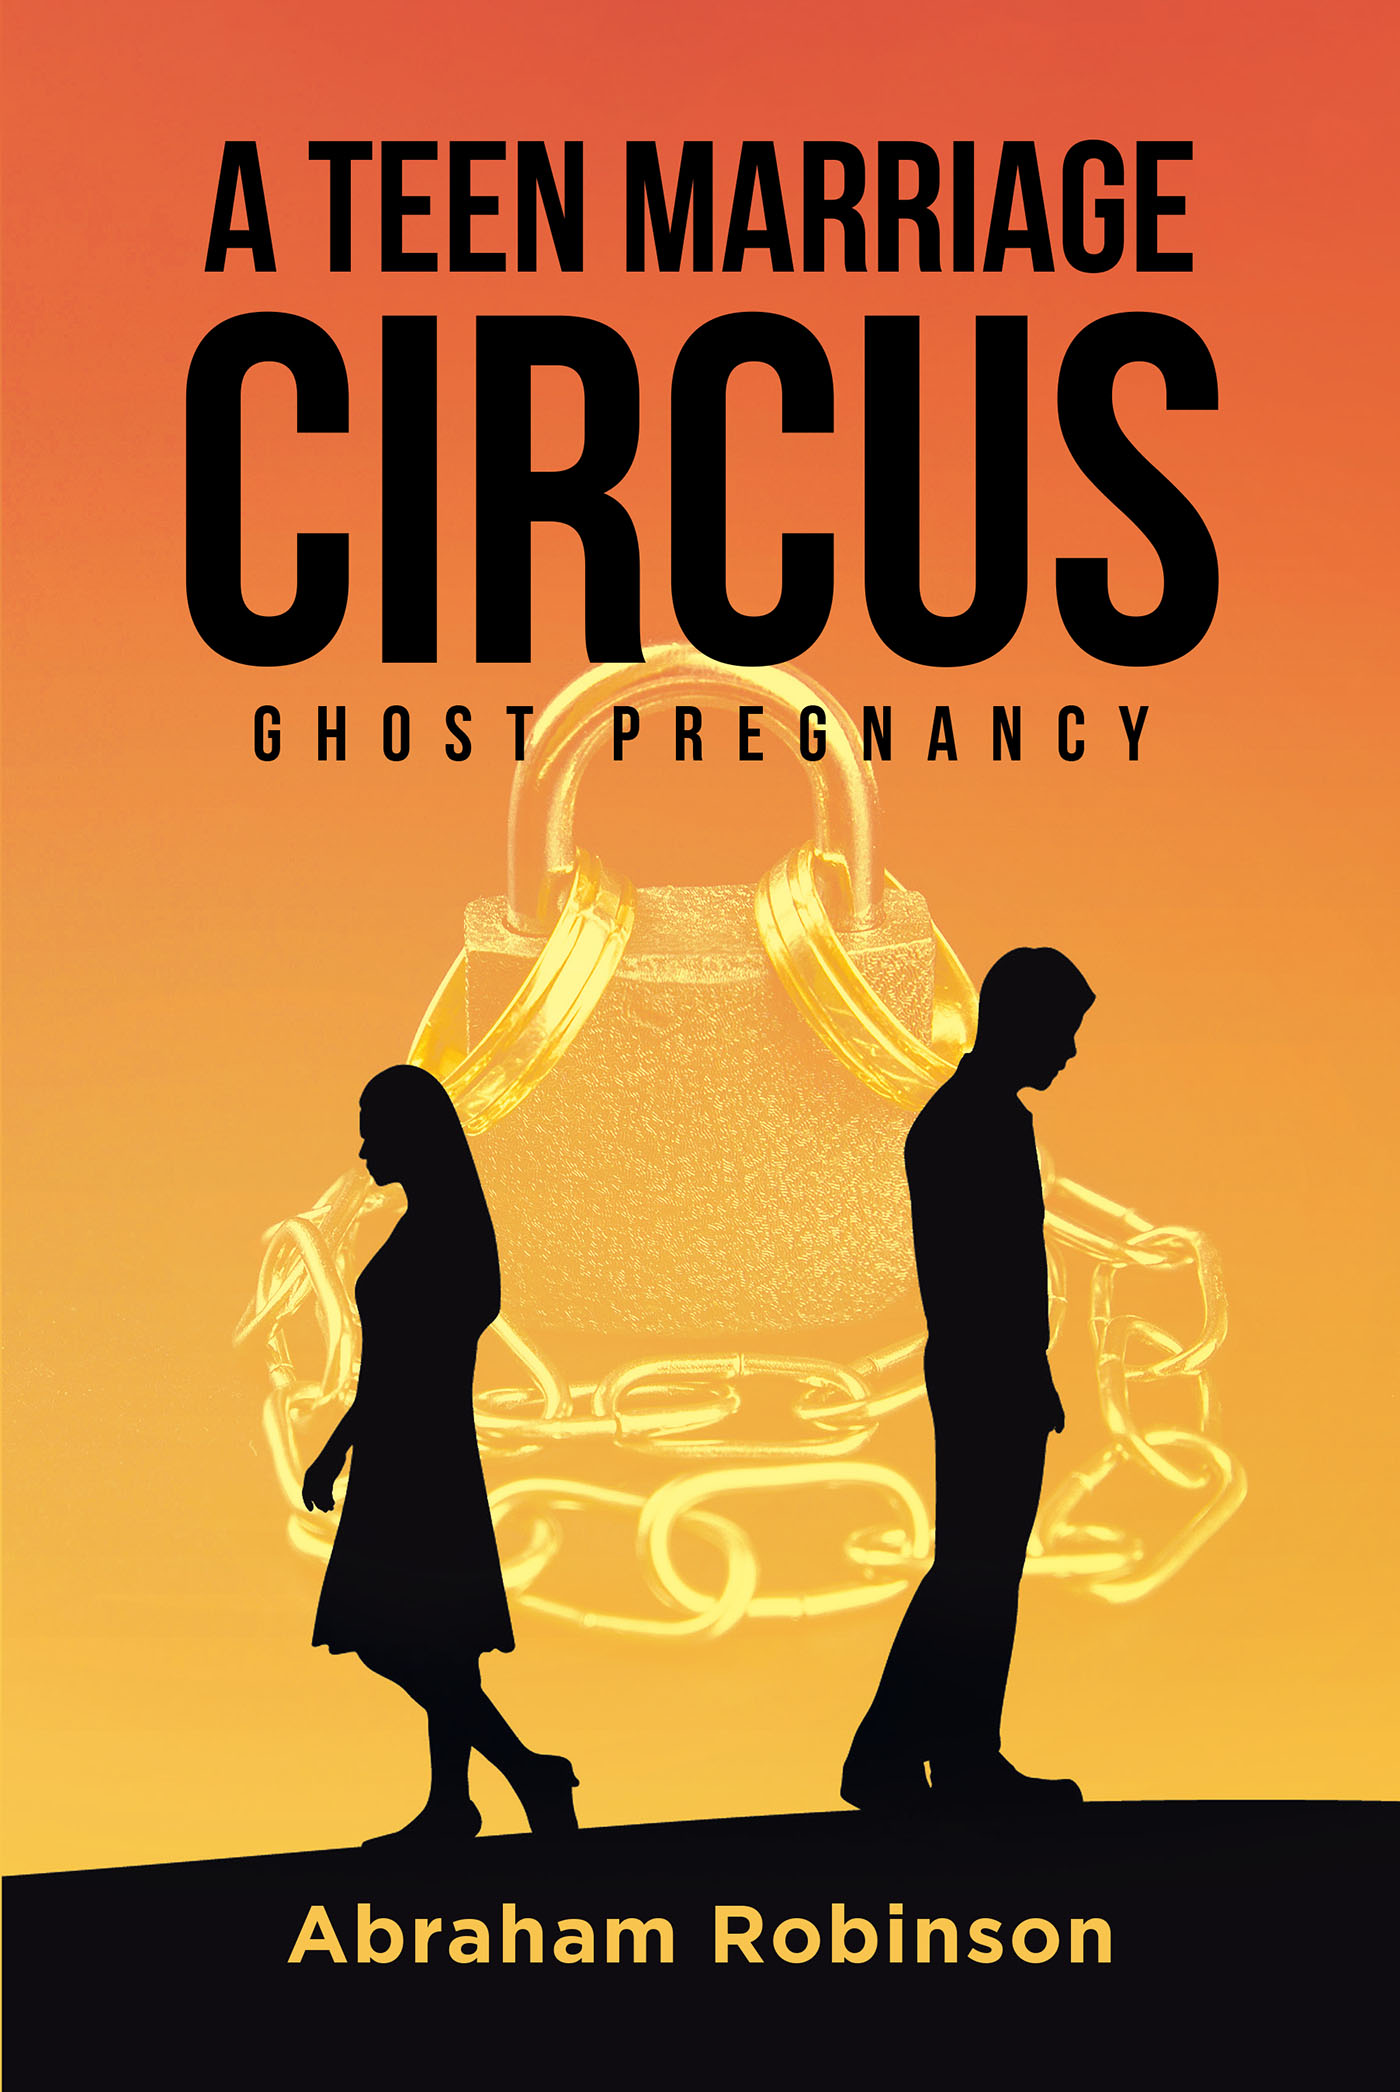 Author Abraham Robinson’s New Book, "A Teen Marriage Circus: Ghost Pregnancy," Documents How the Author Was Tricked Into a Toxic Relationship and Marriage